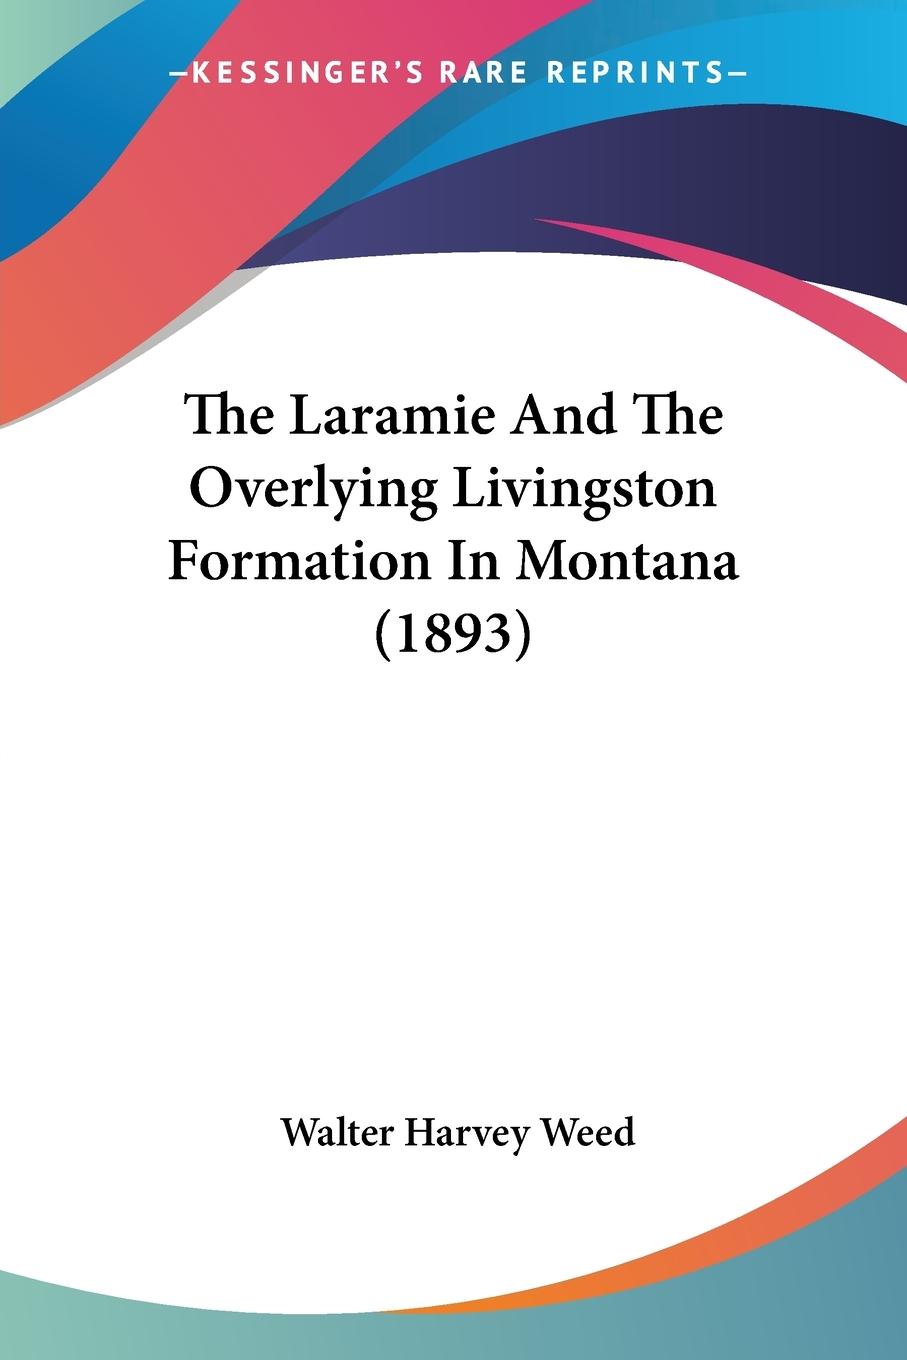 The Laramie And The Overlying Livingston Formation In Montana (1893) - Weed, Walter Harvey